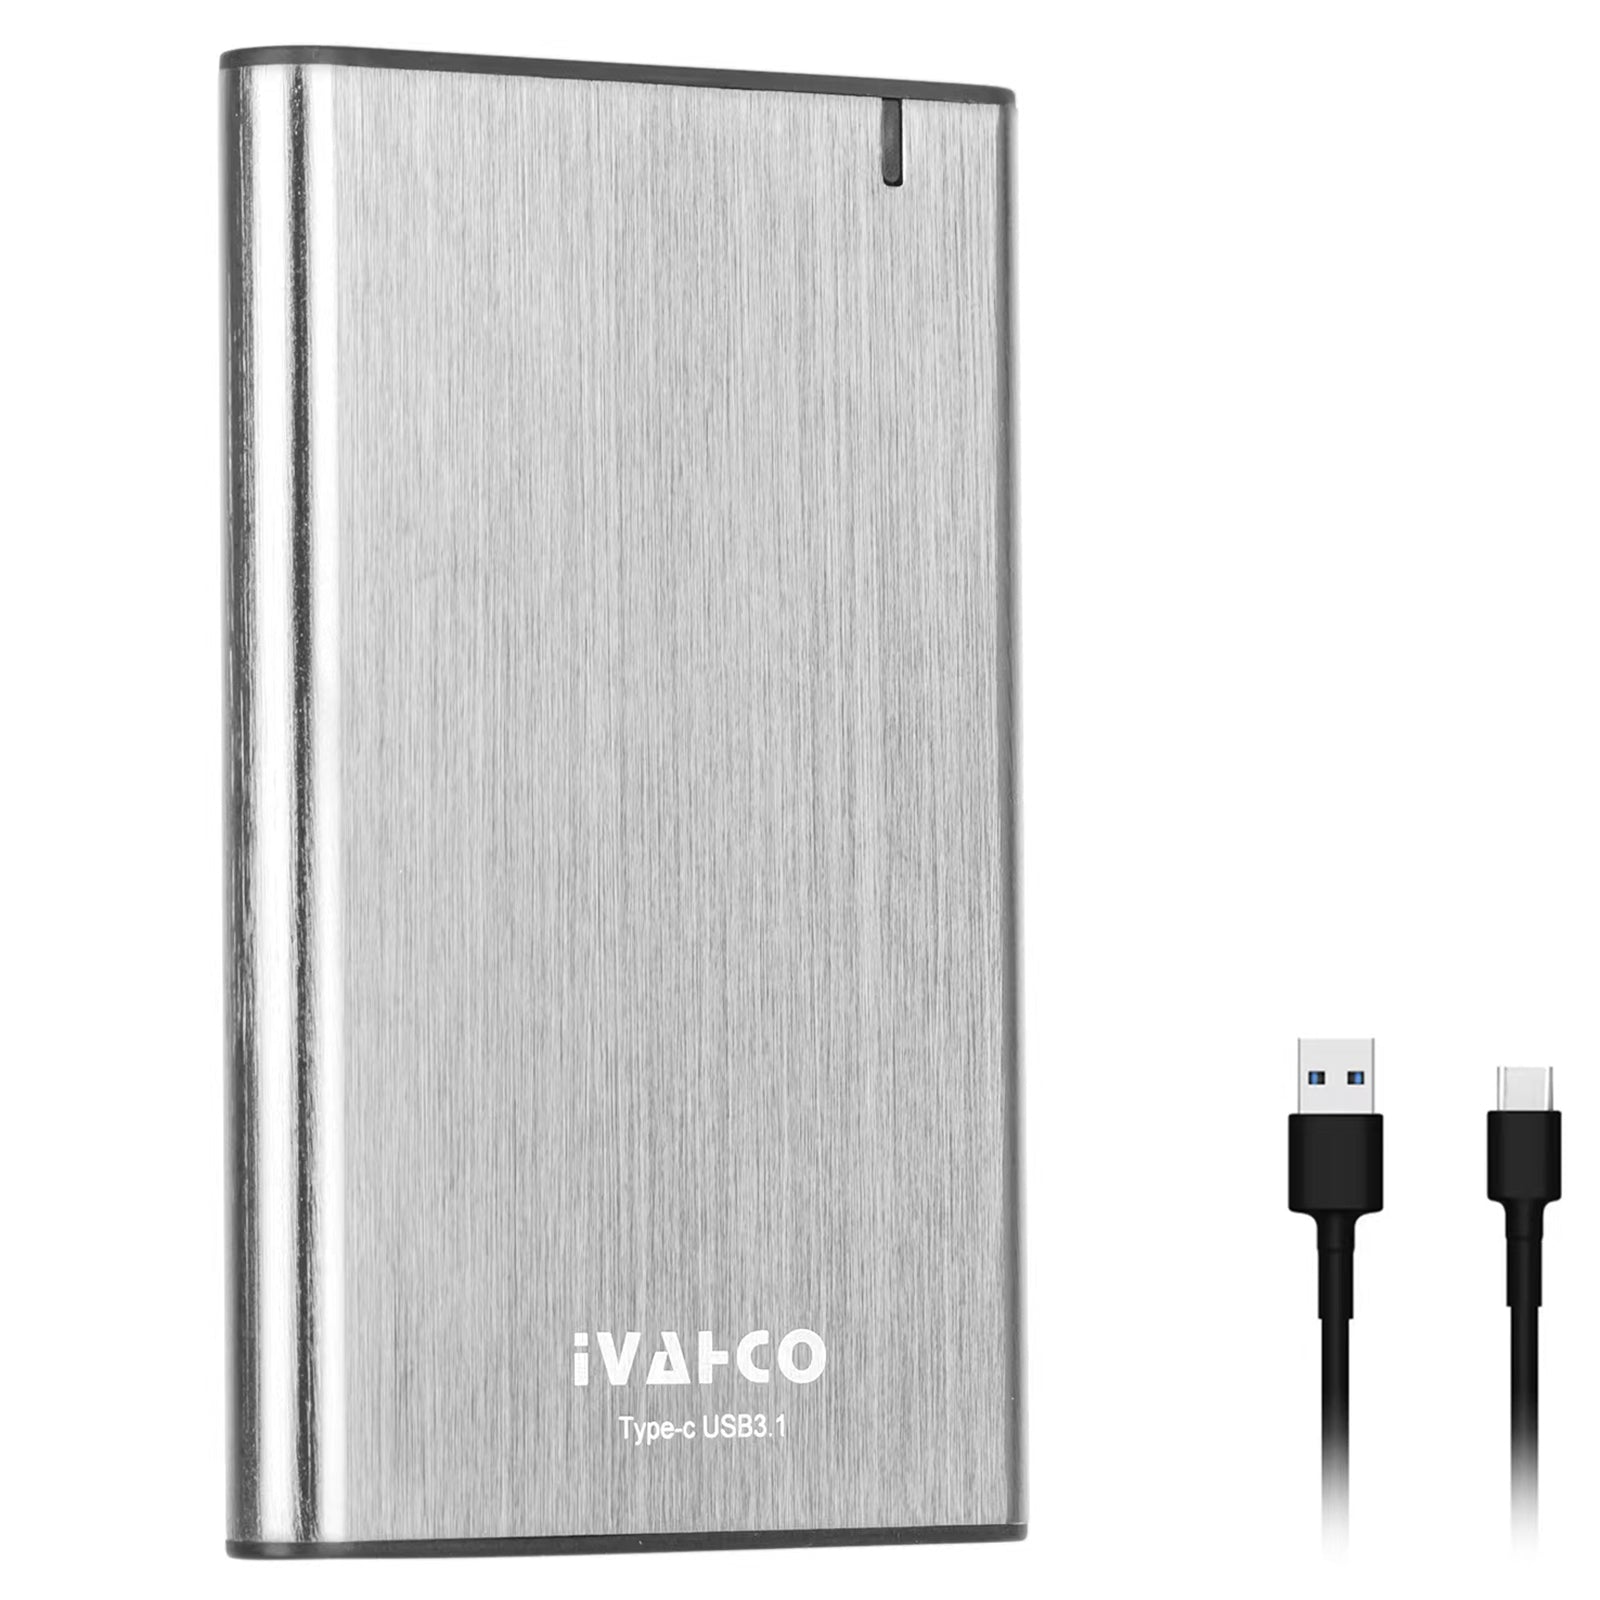 IVAHCO 750GB HDD External Case Type-C USB3.1 2.5" Brushed Metal Solid State Drive Enclosure with Indicator - Silver